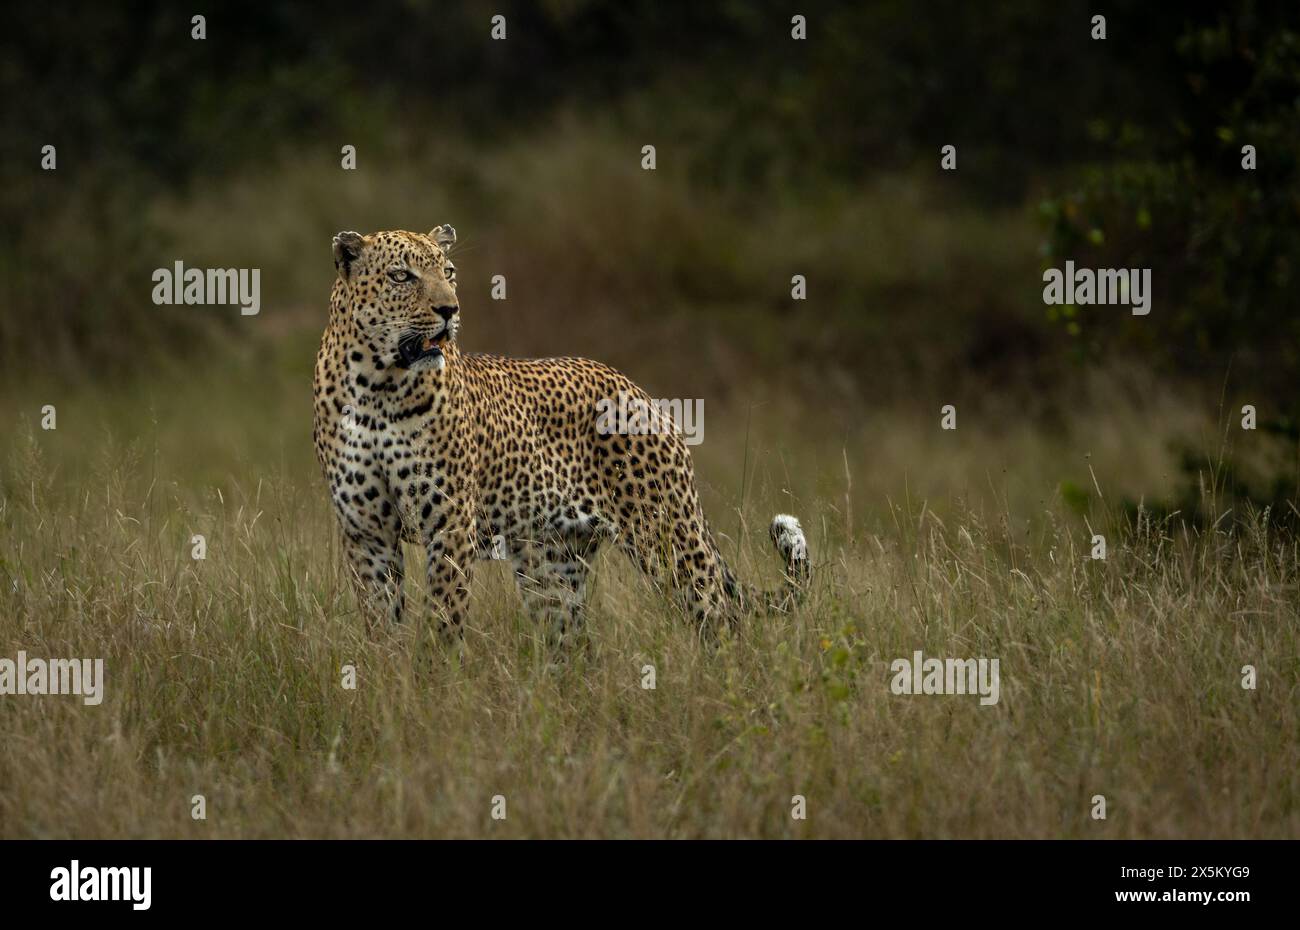 A male leopard, Panthera pardus, standing in grass, looking out. Stock Photo